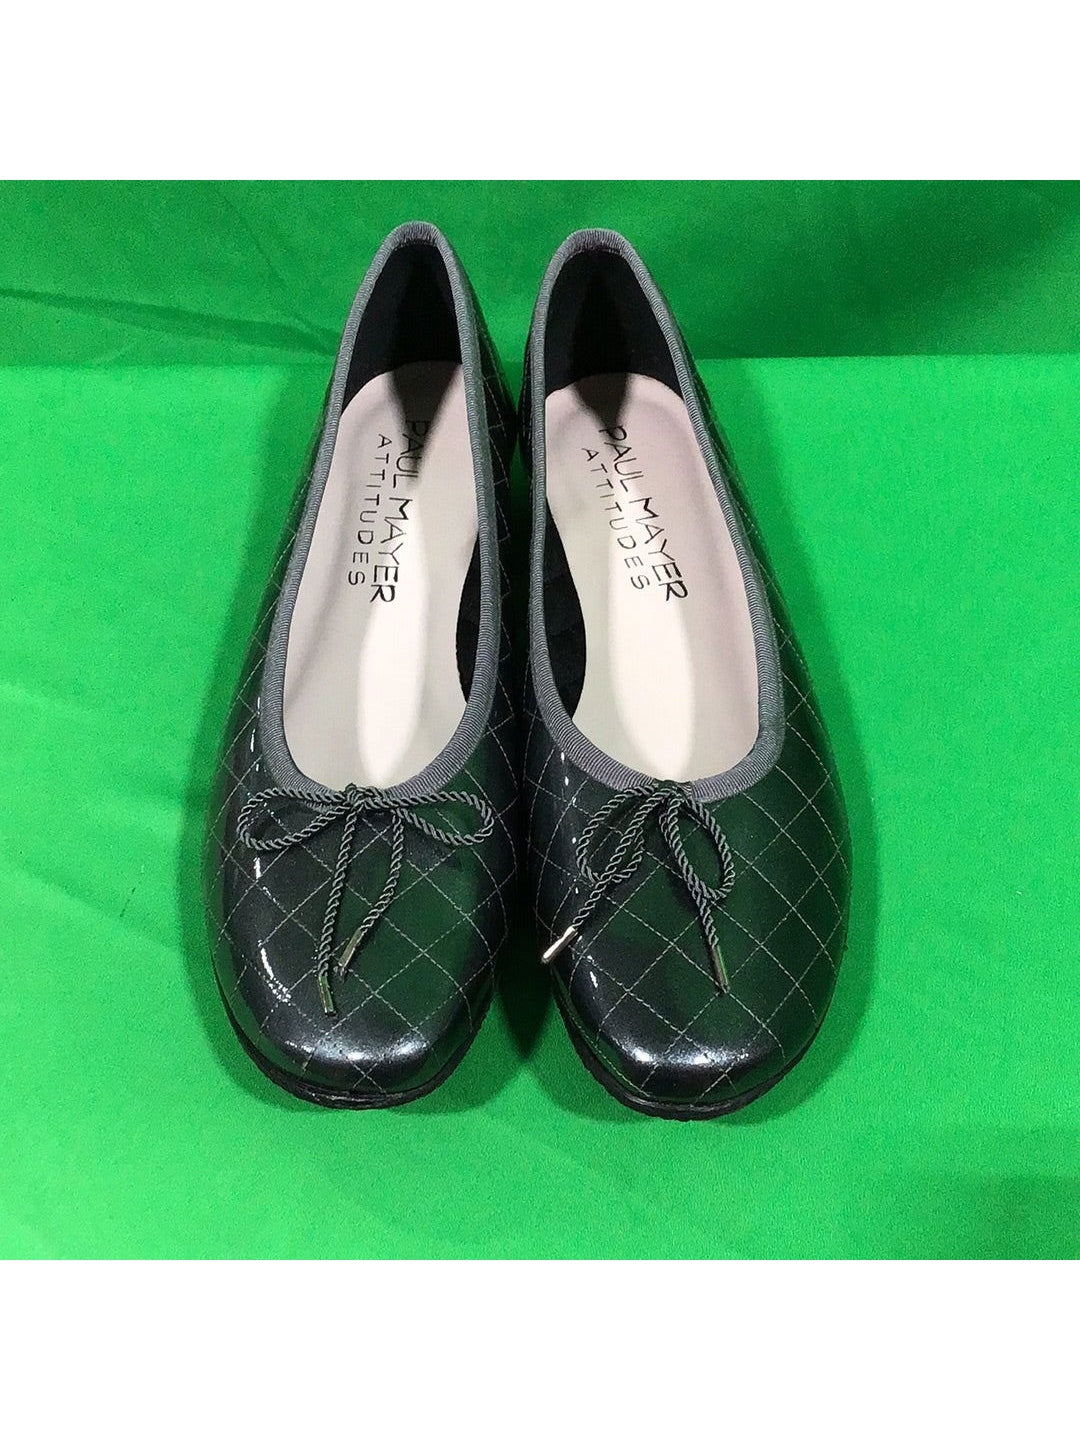 Paul Mayer Attitudes Crown Ladies Size 10 B Charcoal Dark Grey Quilted Ballet Flats Shoes - In Box - The Kennedy Collective Thrift - 